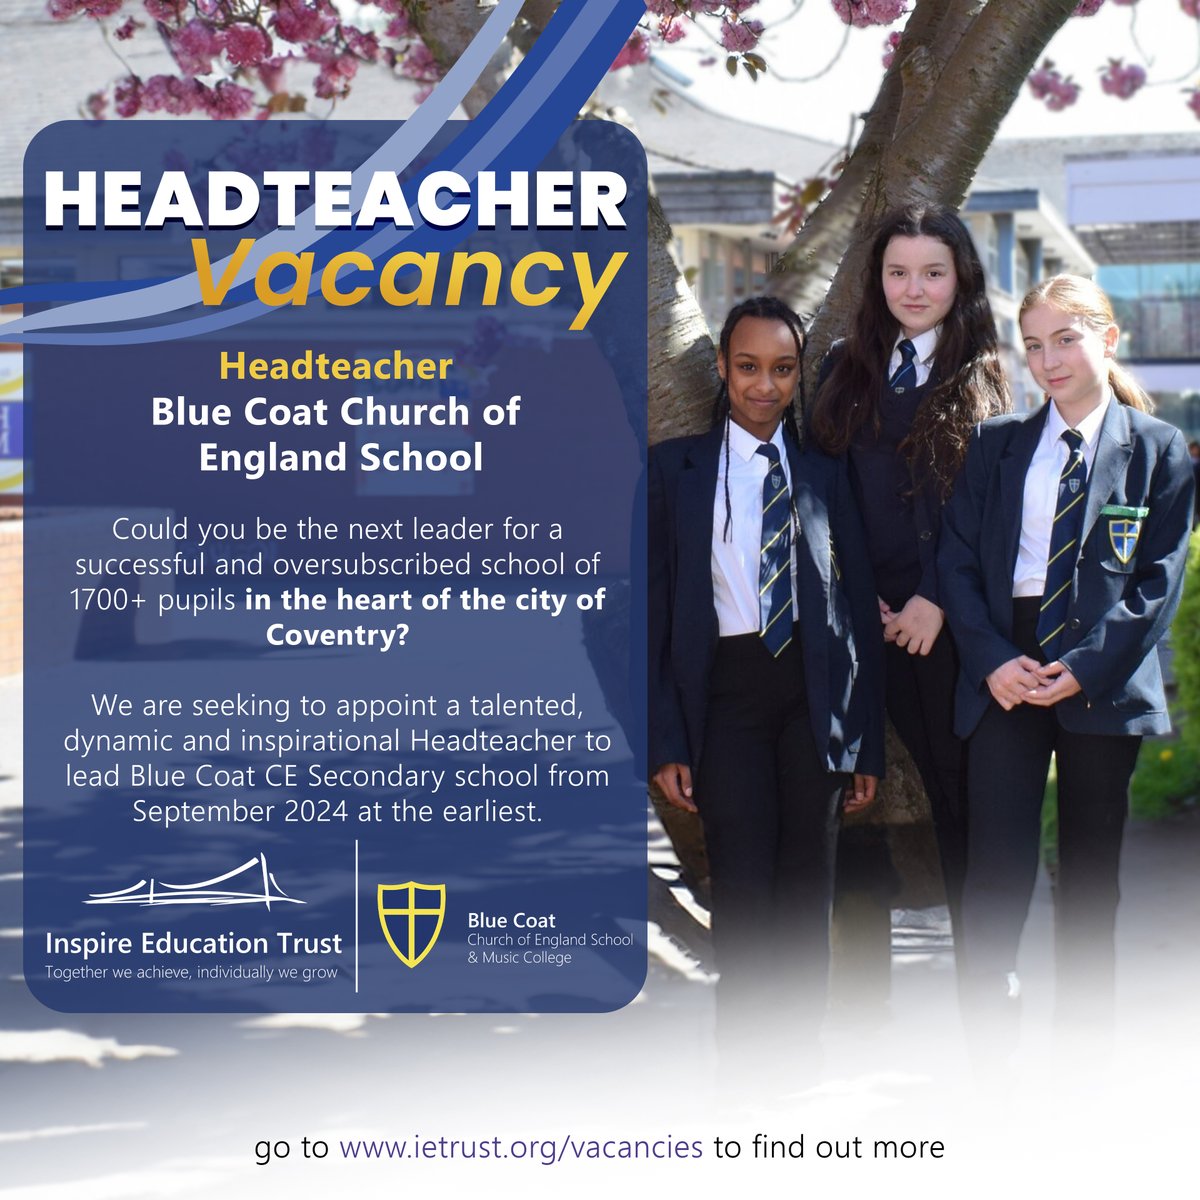 Join us at Blue Coat CofE Secondary School! With outstanding ratings, a supportive environment, and a prime location in Coventry, this is your chance to make a real difference. Apply by May 7th! 🌟 tinyurl.com/yf2cpa7f